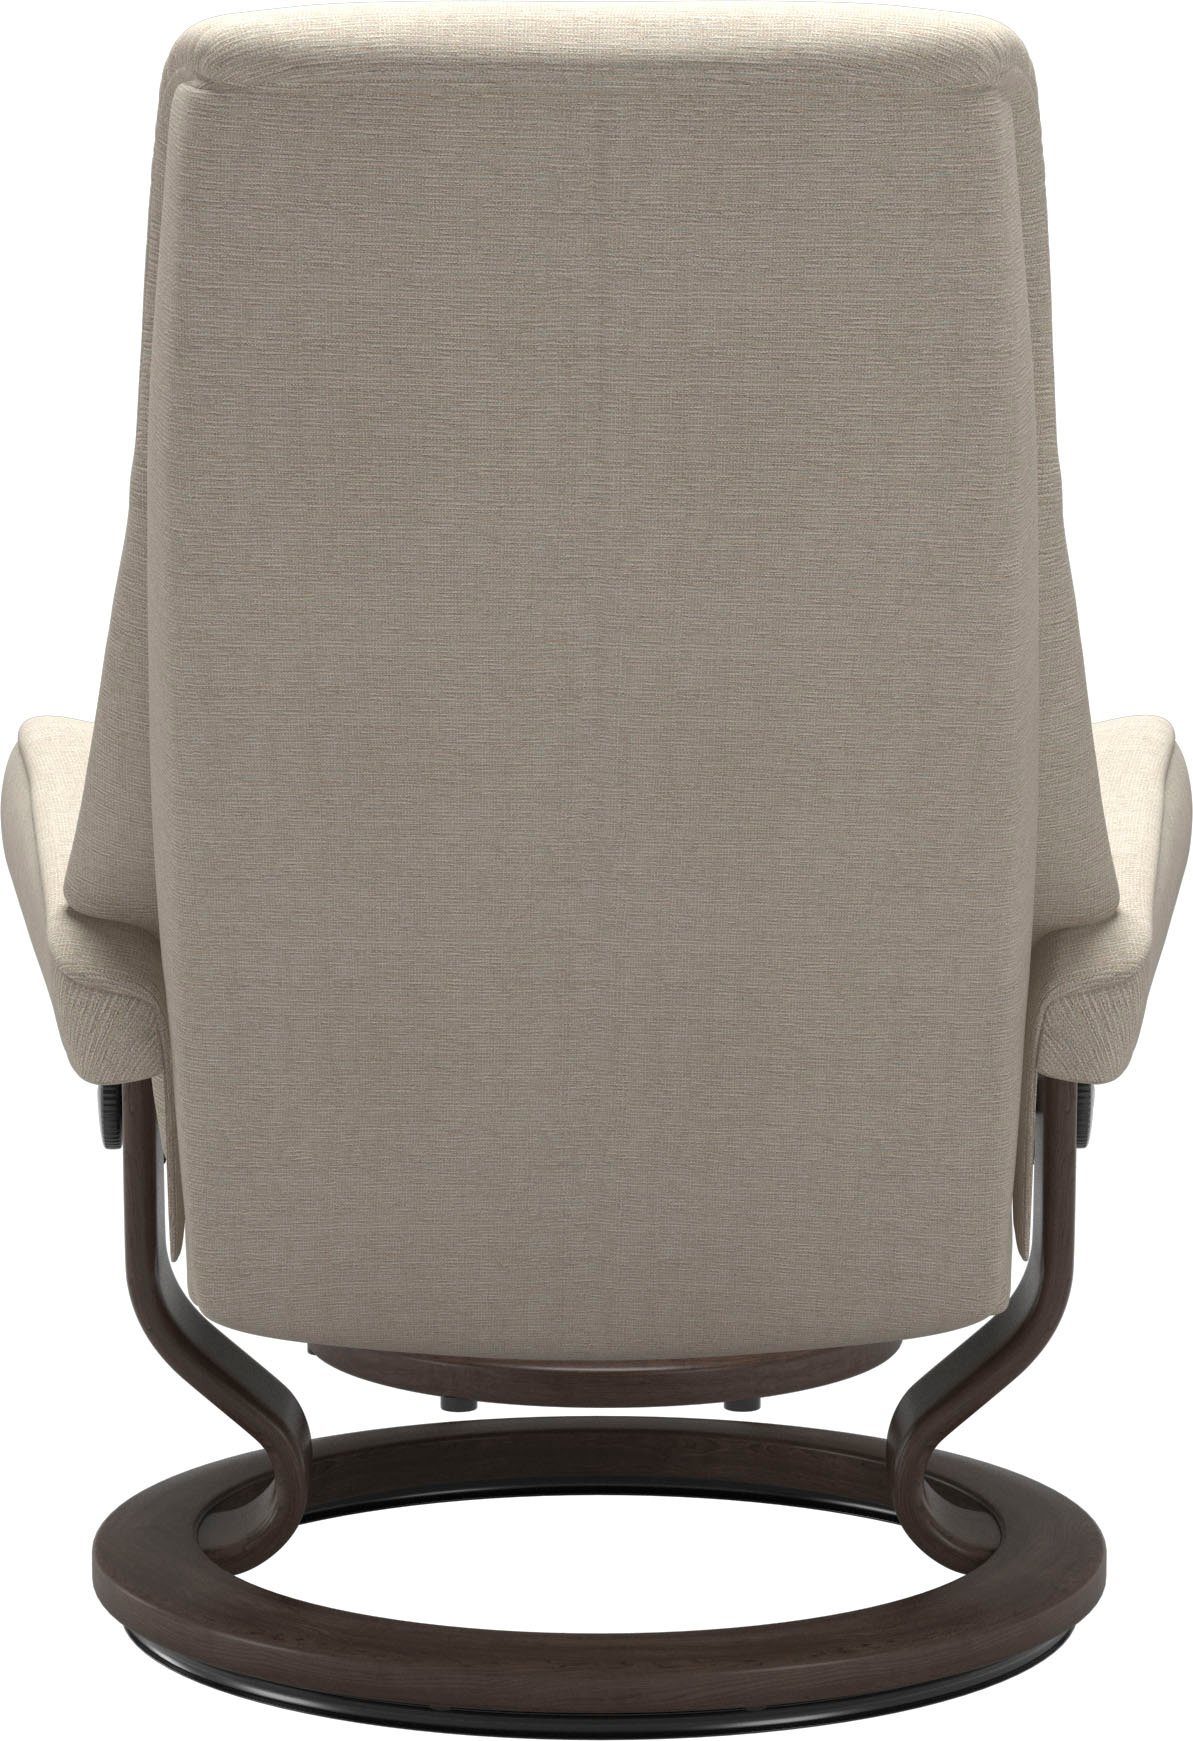 Stressless® Größe Classic Base, Relaxsessel Wenge L,Gestell mit View,